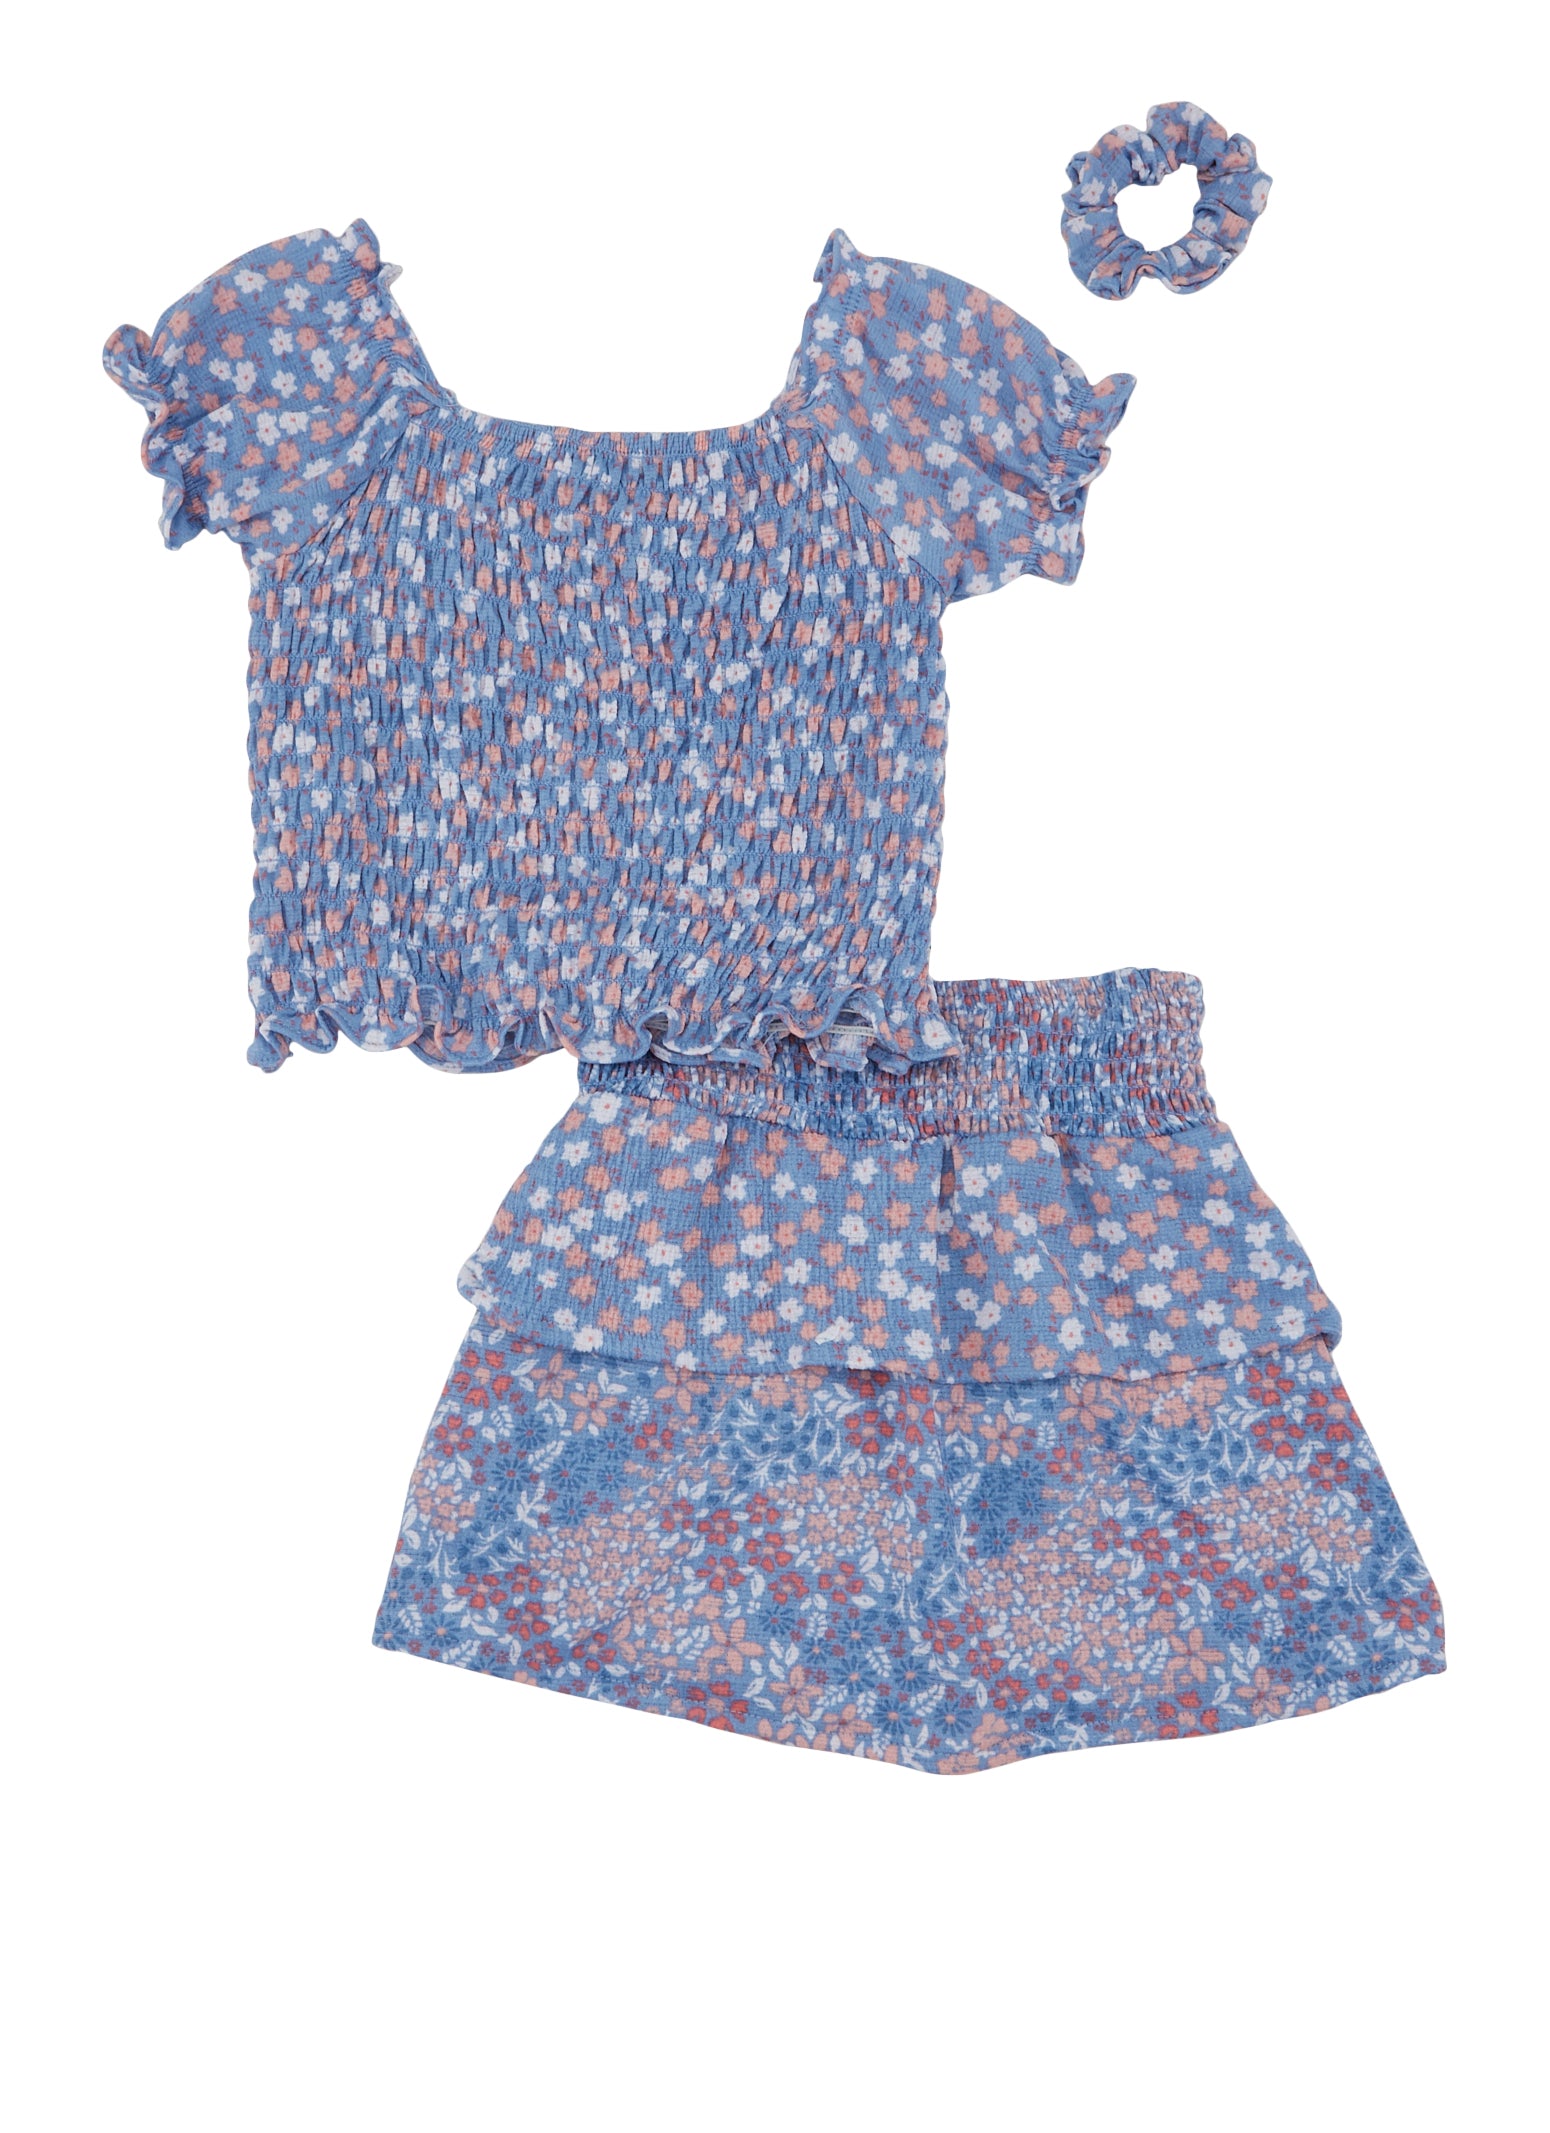 Toddler Girls Floral Smocked Top and Tiered Skirt, Blue, Size 2T